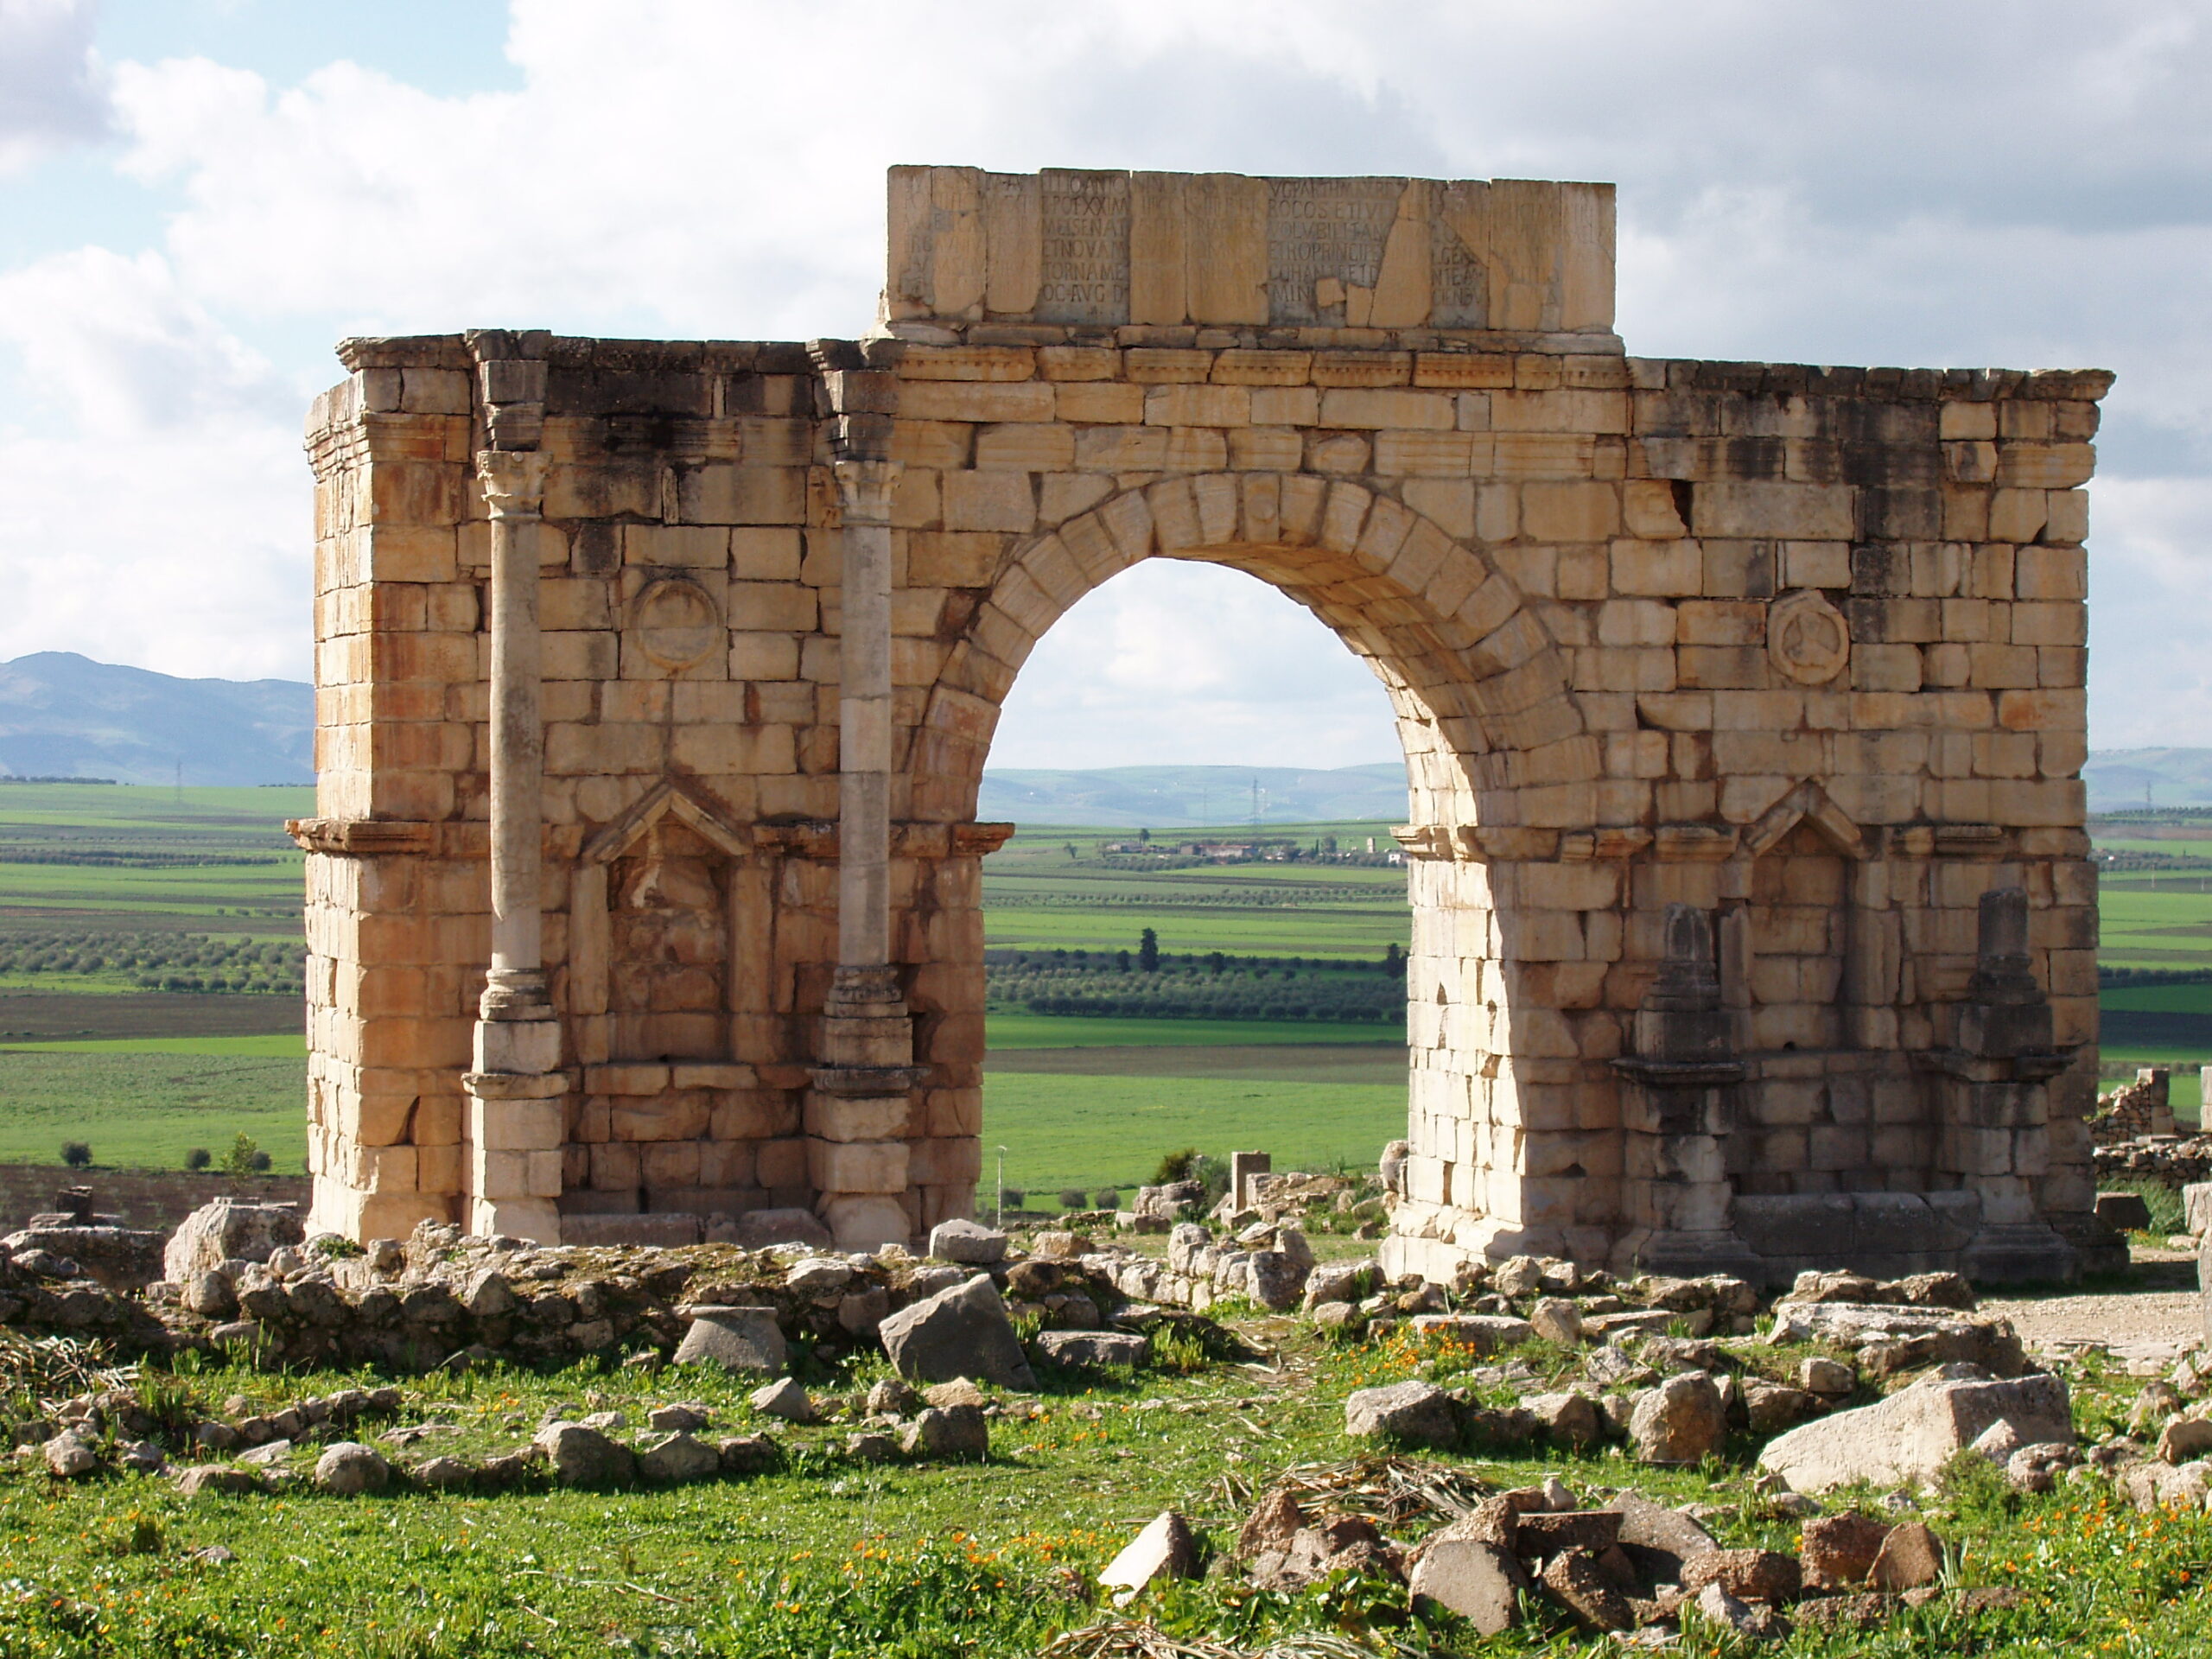 View of the arch monument dedicated to emperor Caracalla and his mother Julia Domna in 217 C.E. at Volubilis, Morocco. Volubilis was listed as a UNESCO World Heritage site in 1997 (photo: damian entwistle, CC BY-NC 2.0)